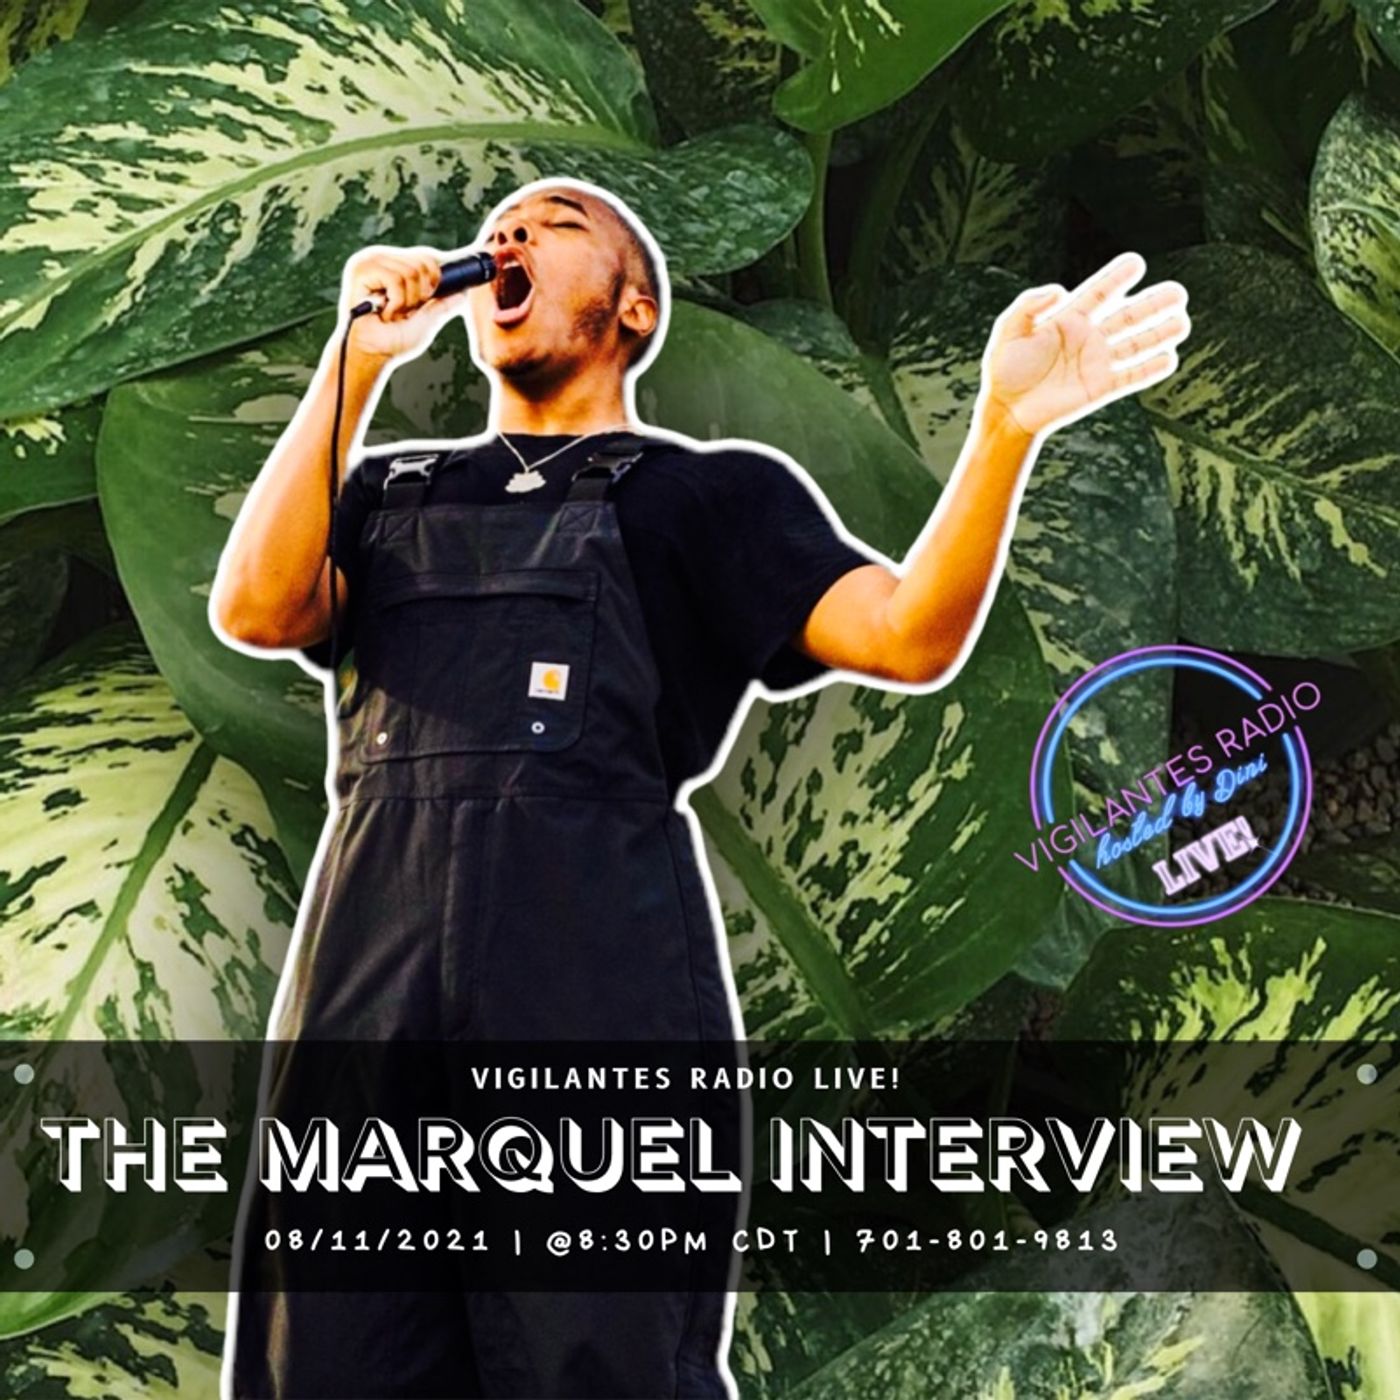 The Marquel Interview. Image